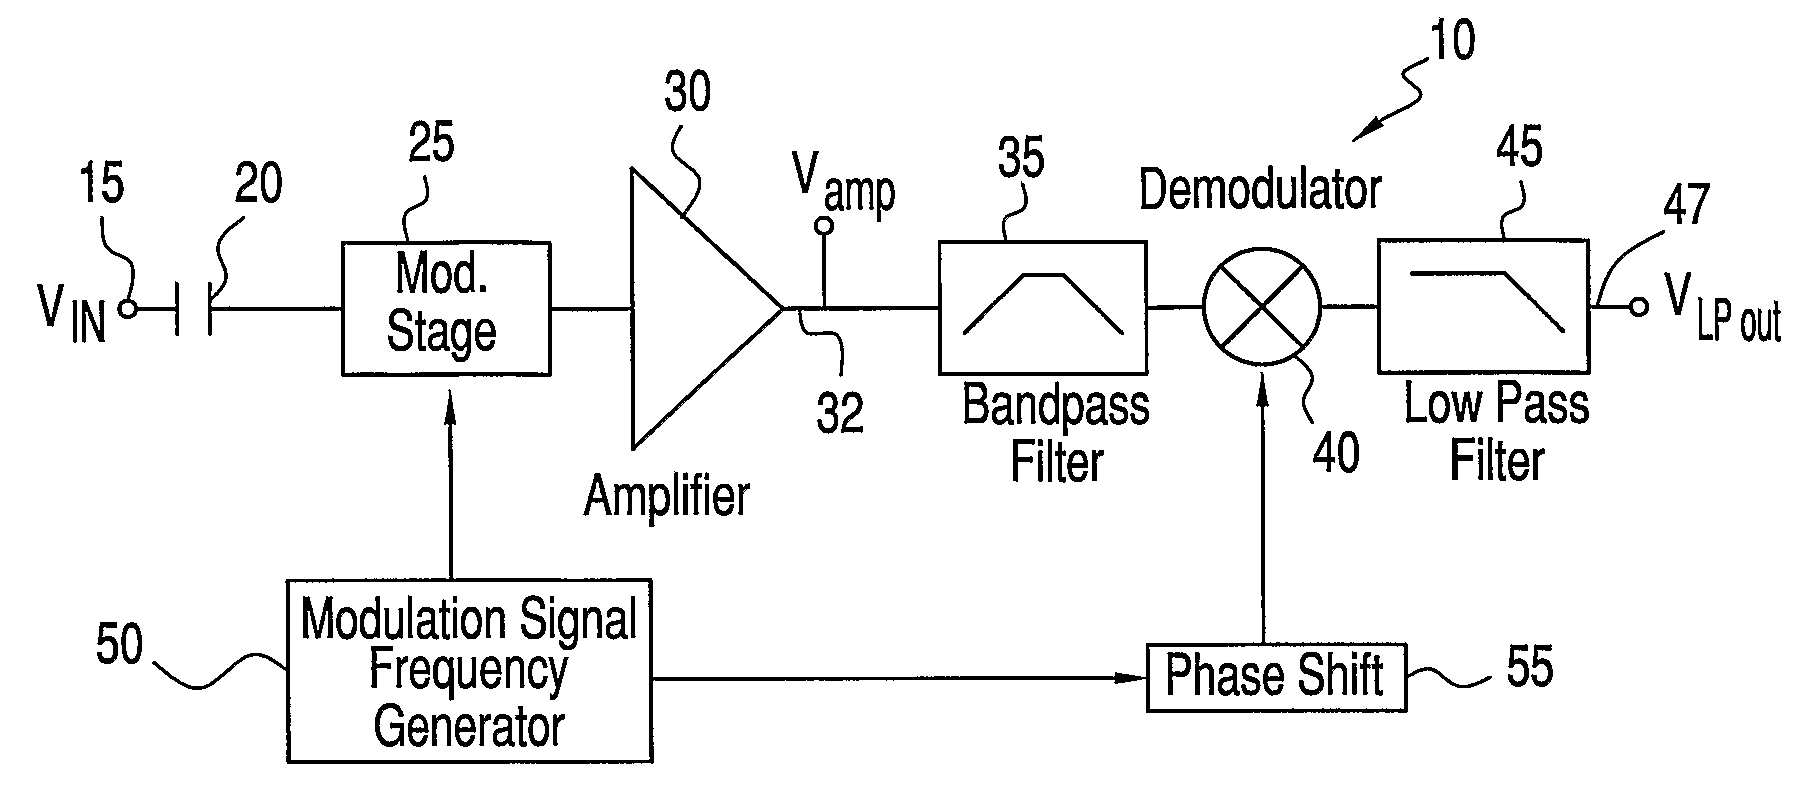 Amplifier Circuit and Method for Reducing Voltage and Current Noise